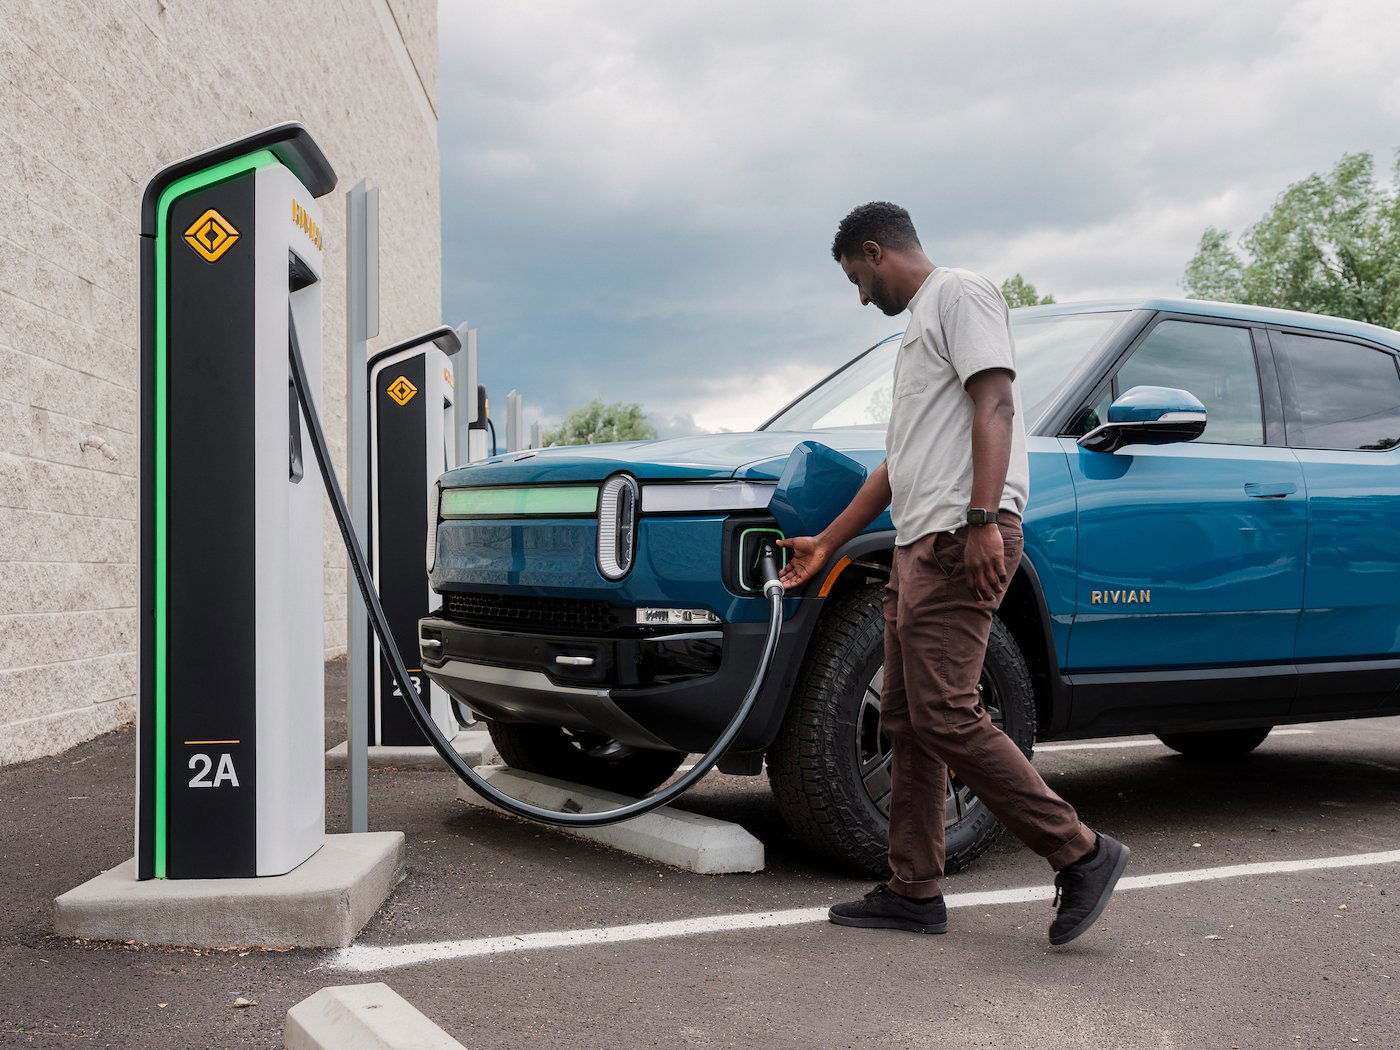 Rivian models with access to Tesla Superchargers.